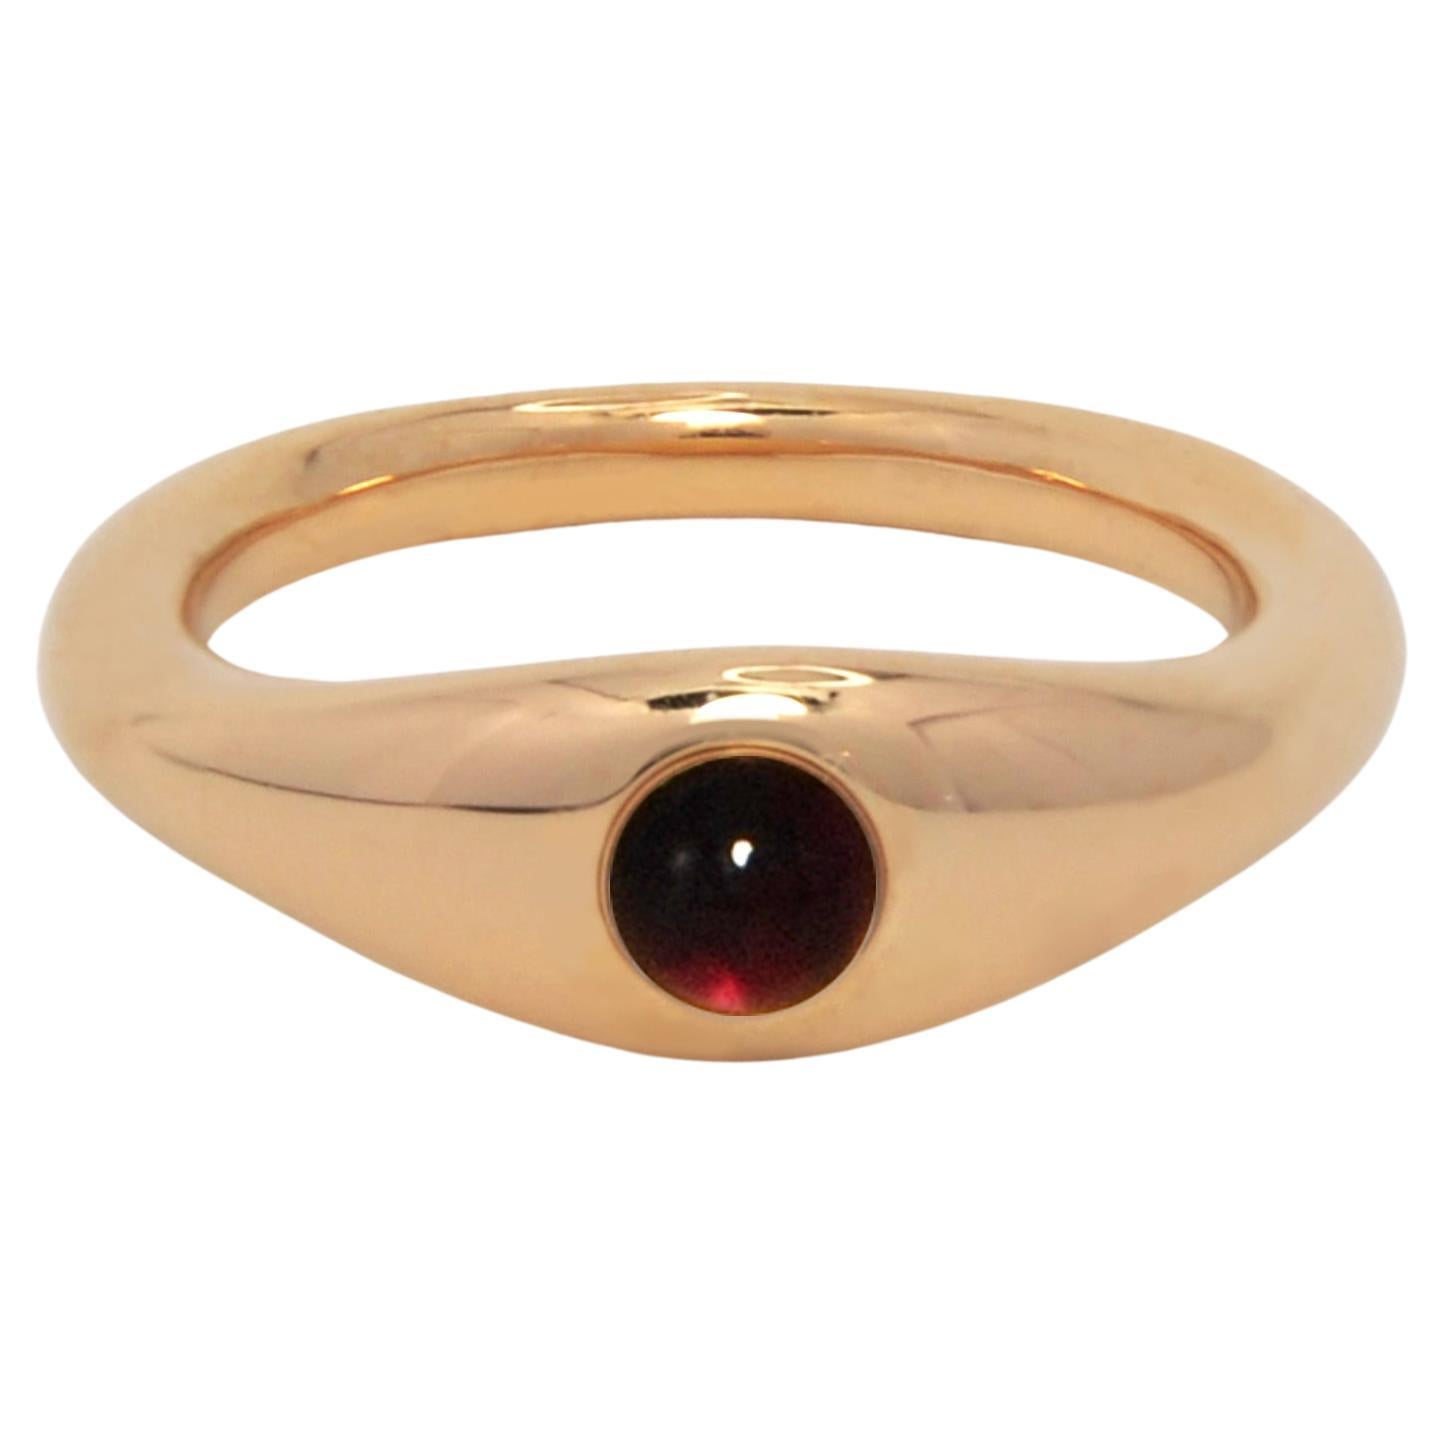 Ruth Nyc Lun Ring, 14k Yellow Gold and Garnet Ring